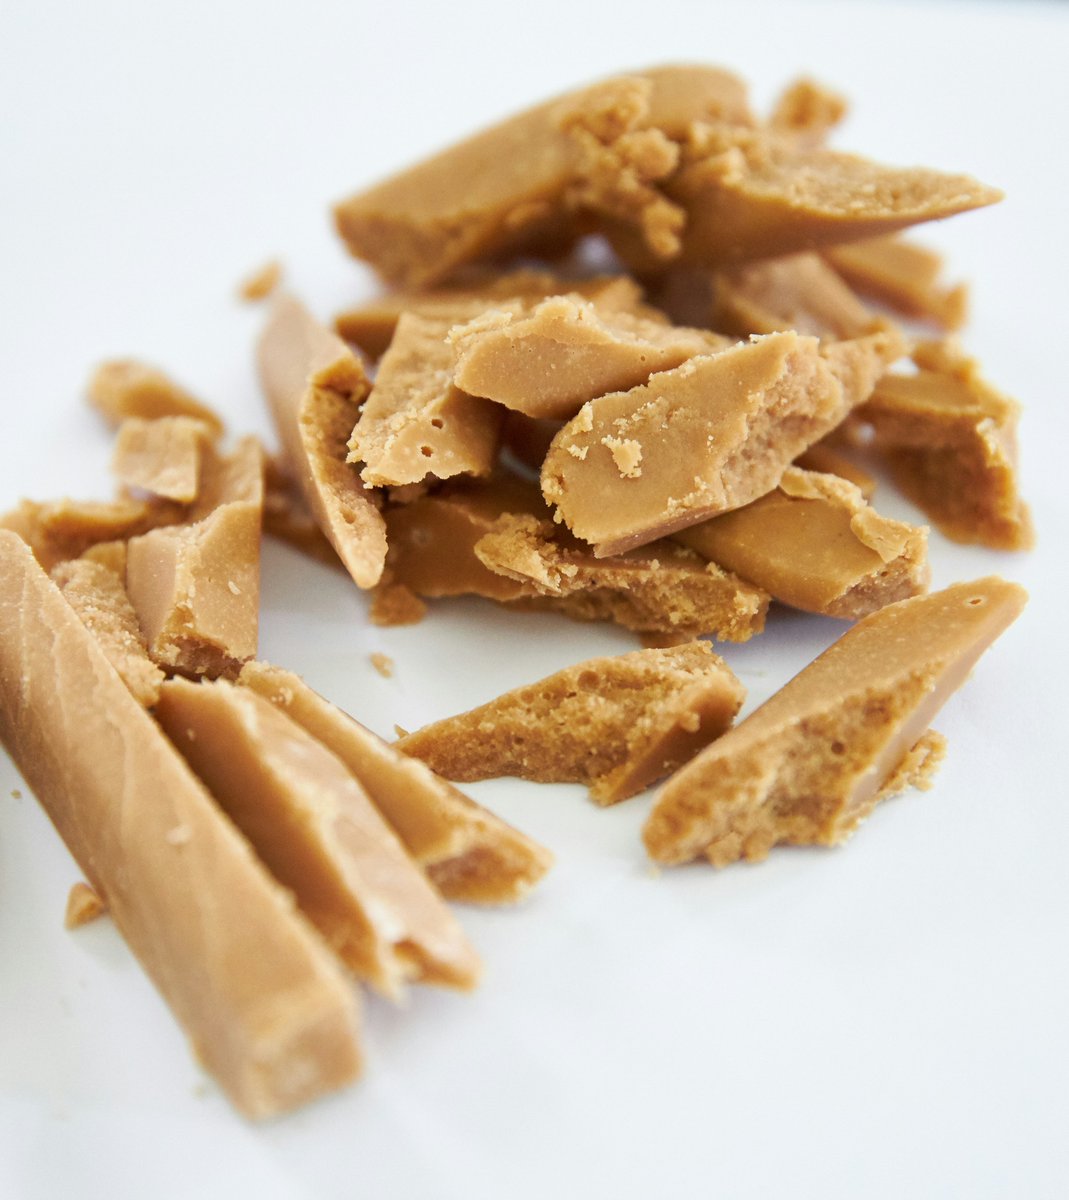 If you are planning to do some family baking then look no further than this easy recipe for Taffy or Everton Toffee. We would love to see some snaps of the delicious treats you have made - please share them with us! #WelshChristmas #toffeerecipes bbc.co.uk/wales/christma…